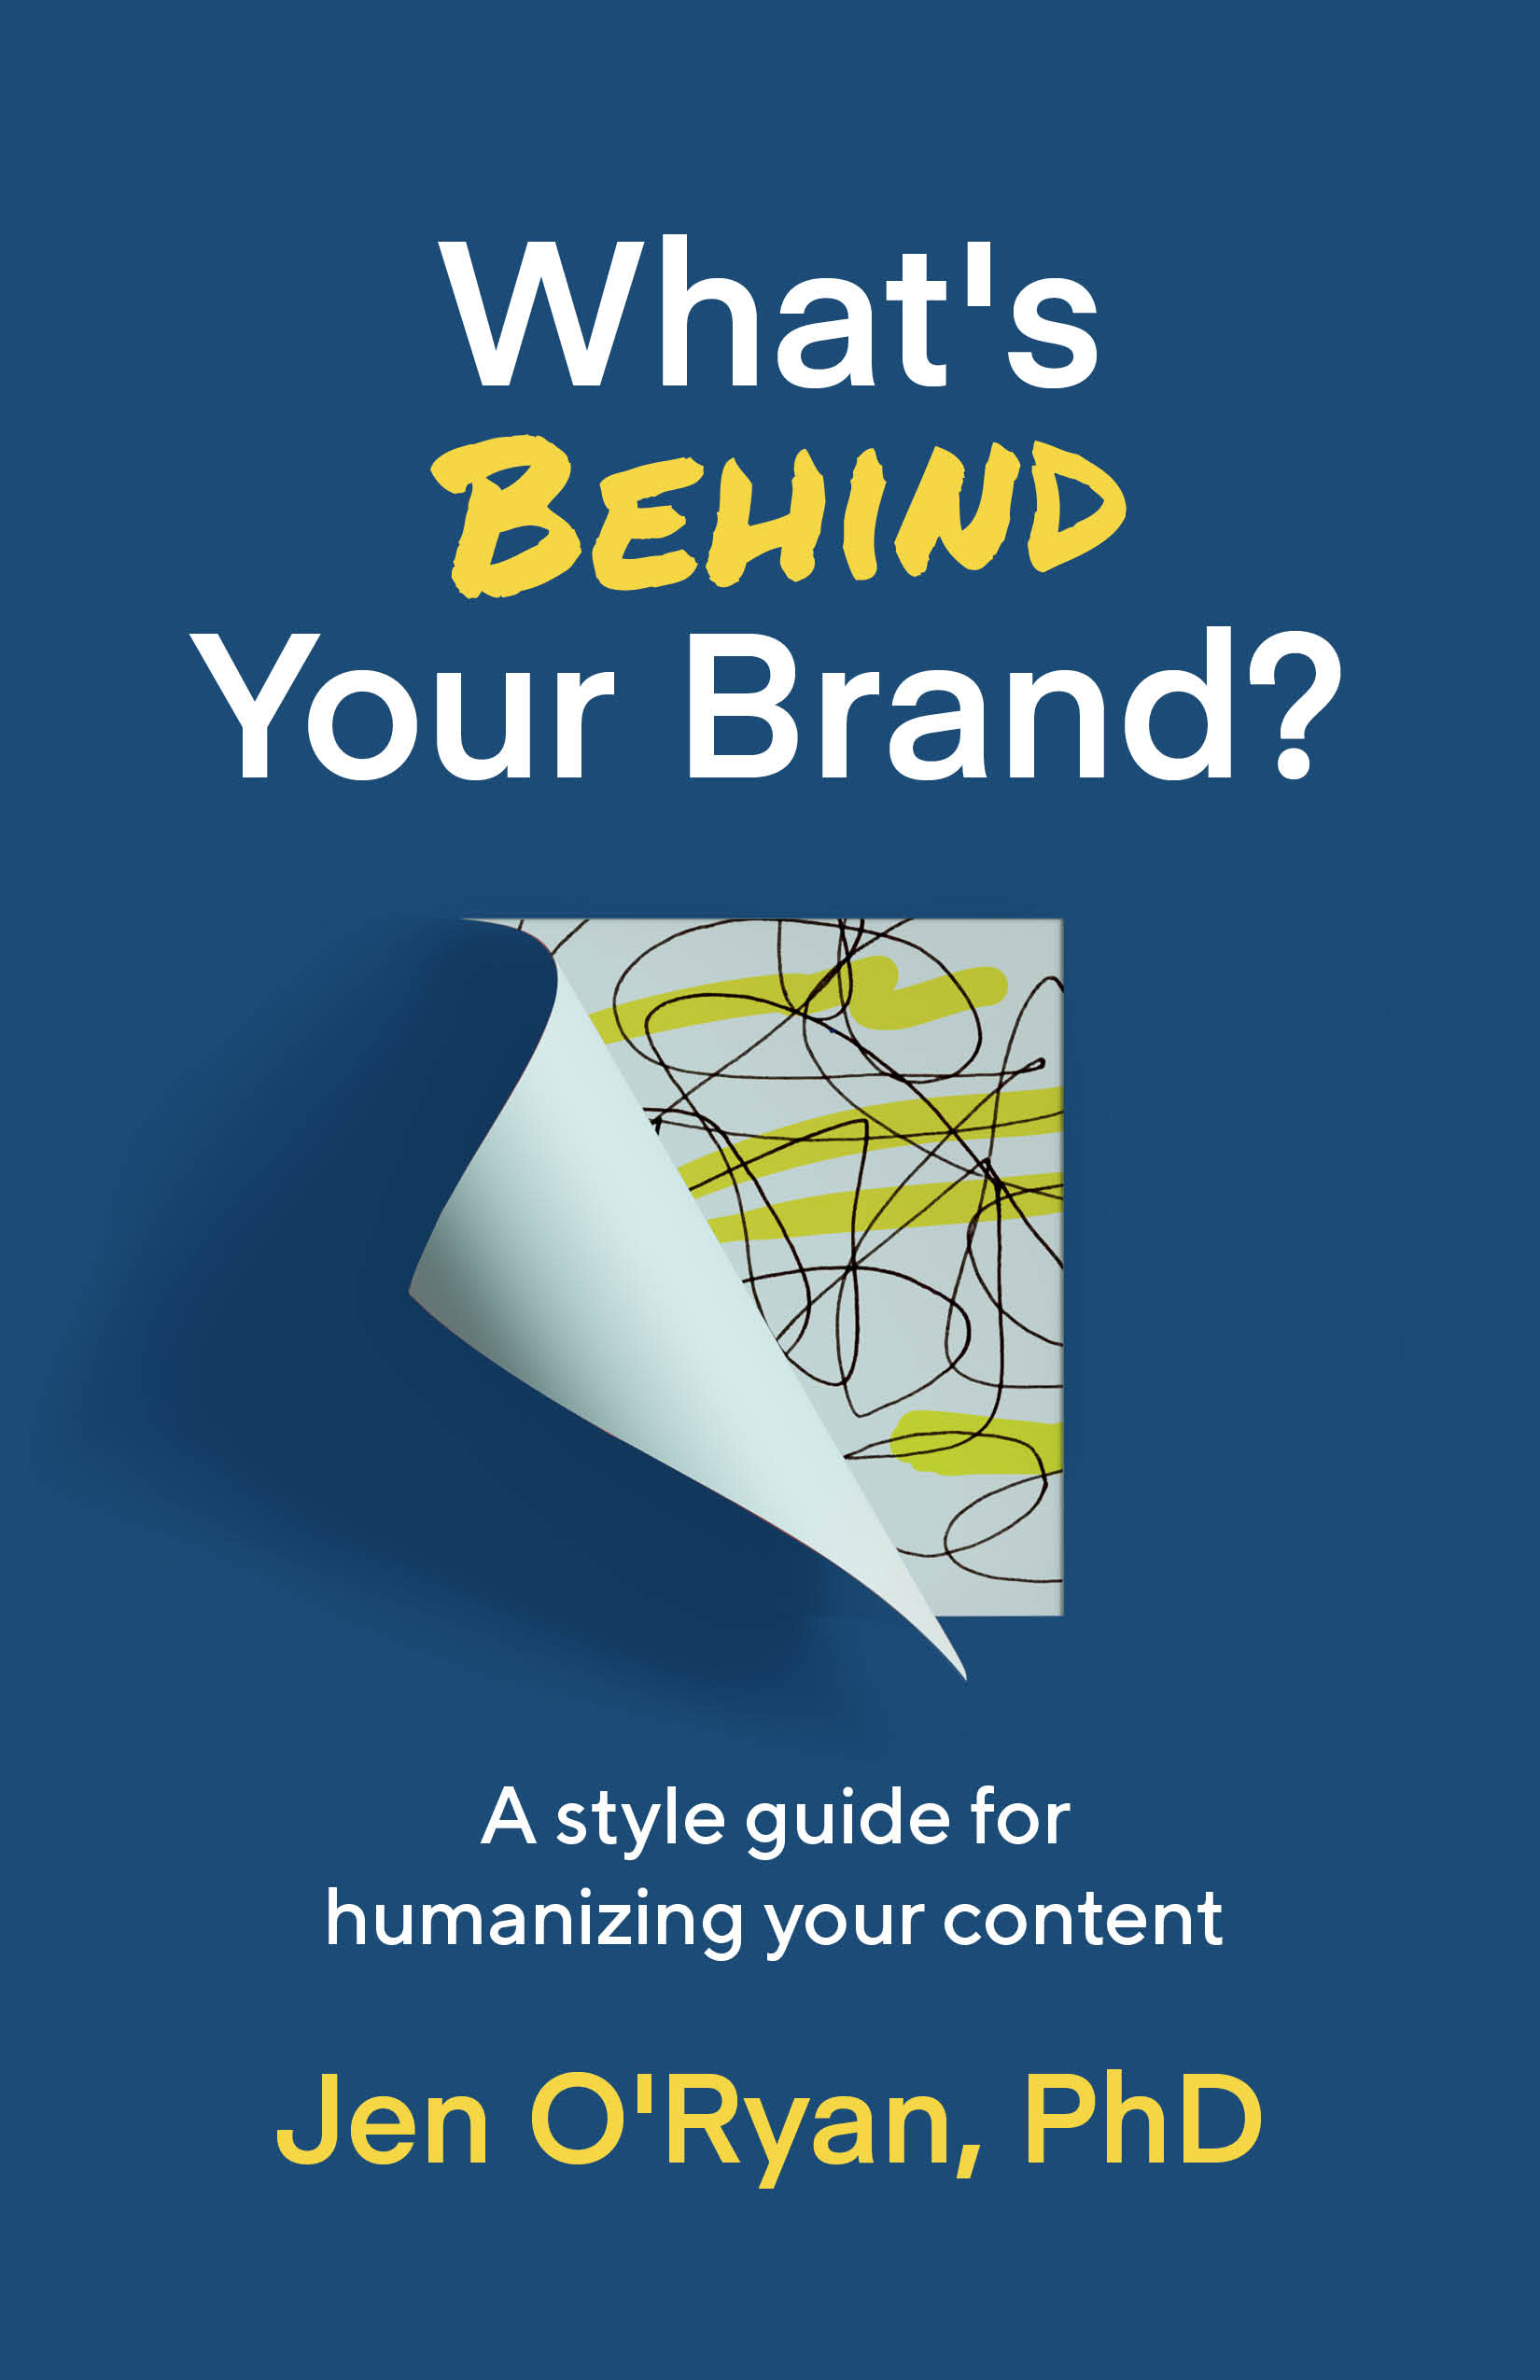 Image of a book cover, blue with white and yellow words of the book title "What's Behind Your Brand?"